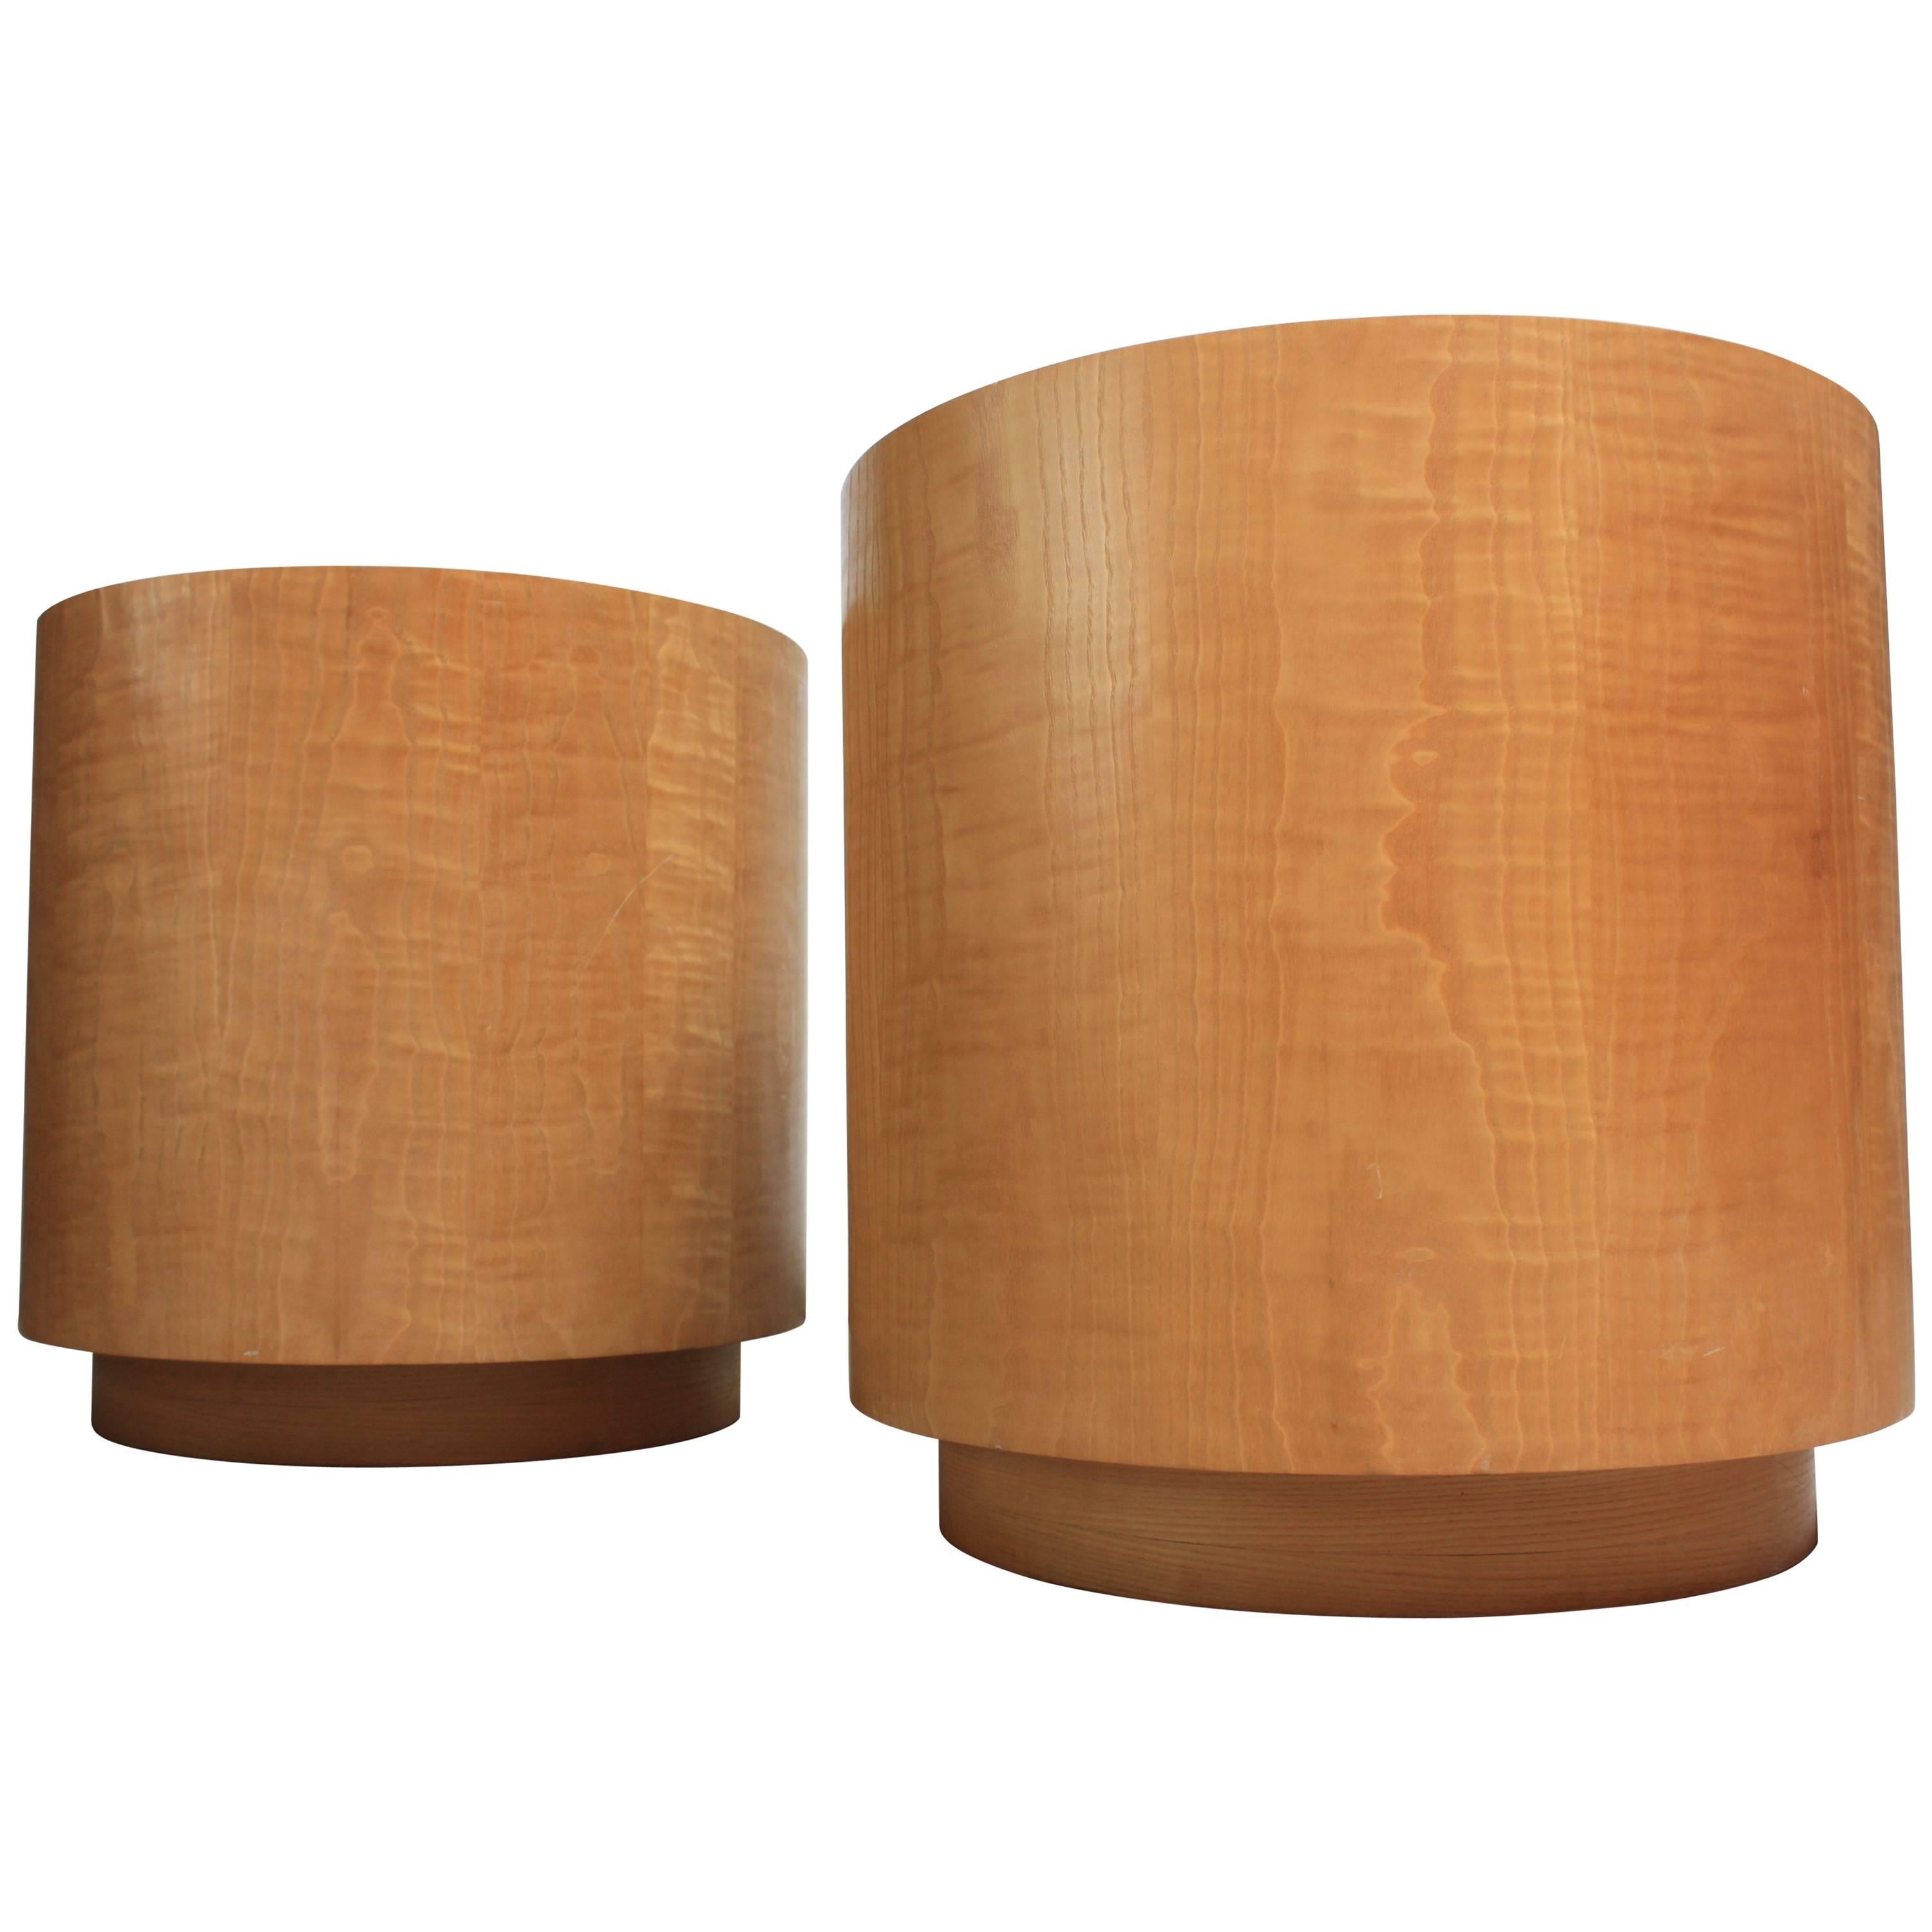 Pair of Large Bookmatched Bird's-Eye Maple Drum Tables